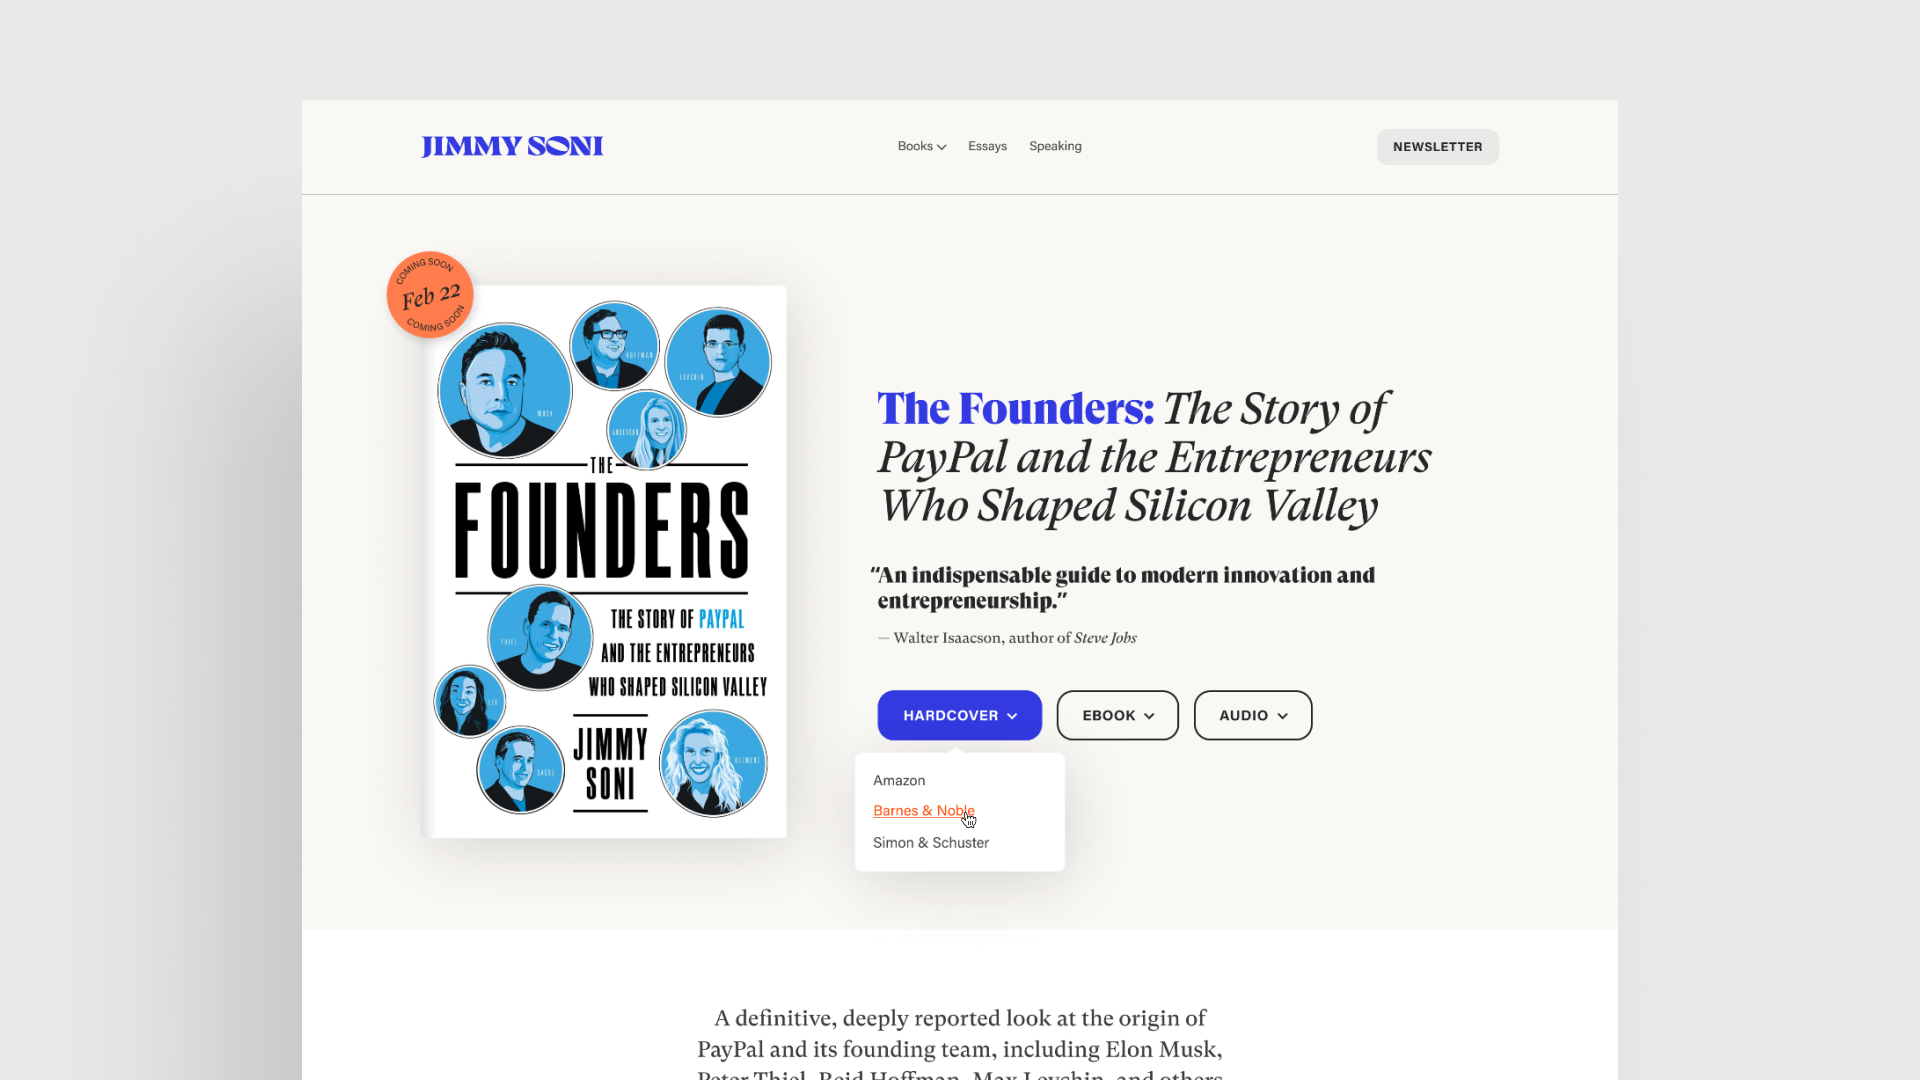 Screenshot of the above-the-fold section of the web page showcasing Jimmy Soni's book, “The Founders”